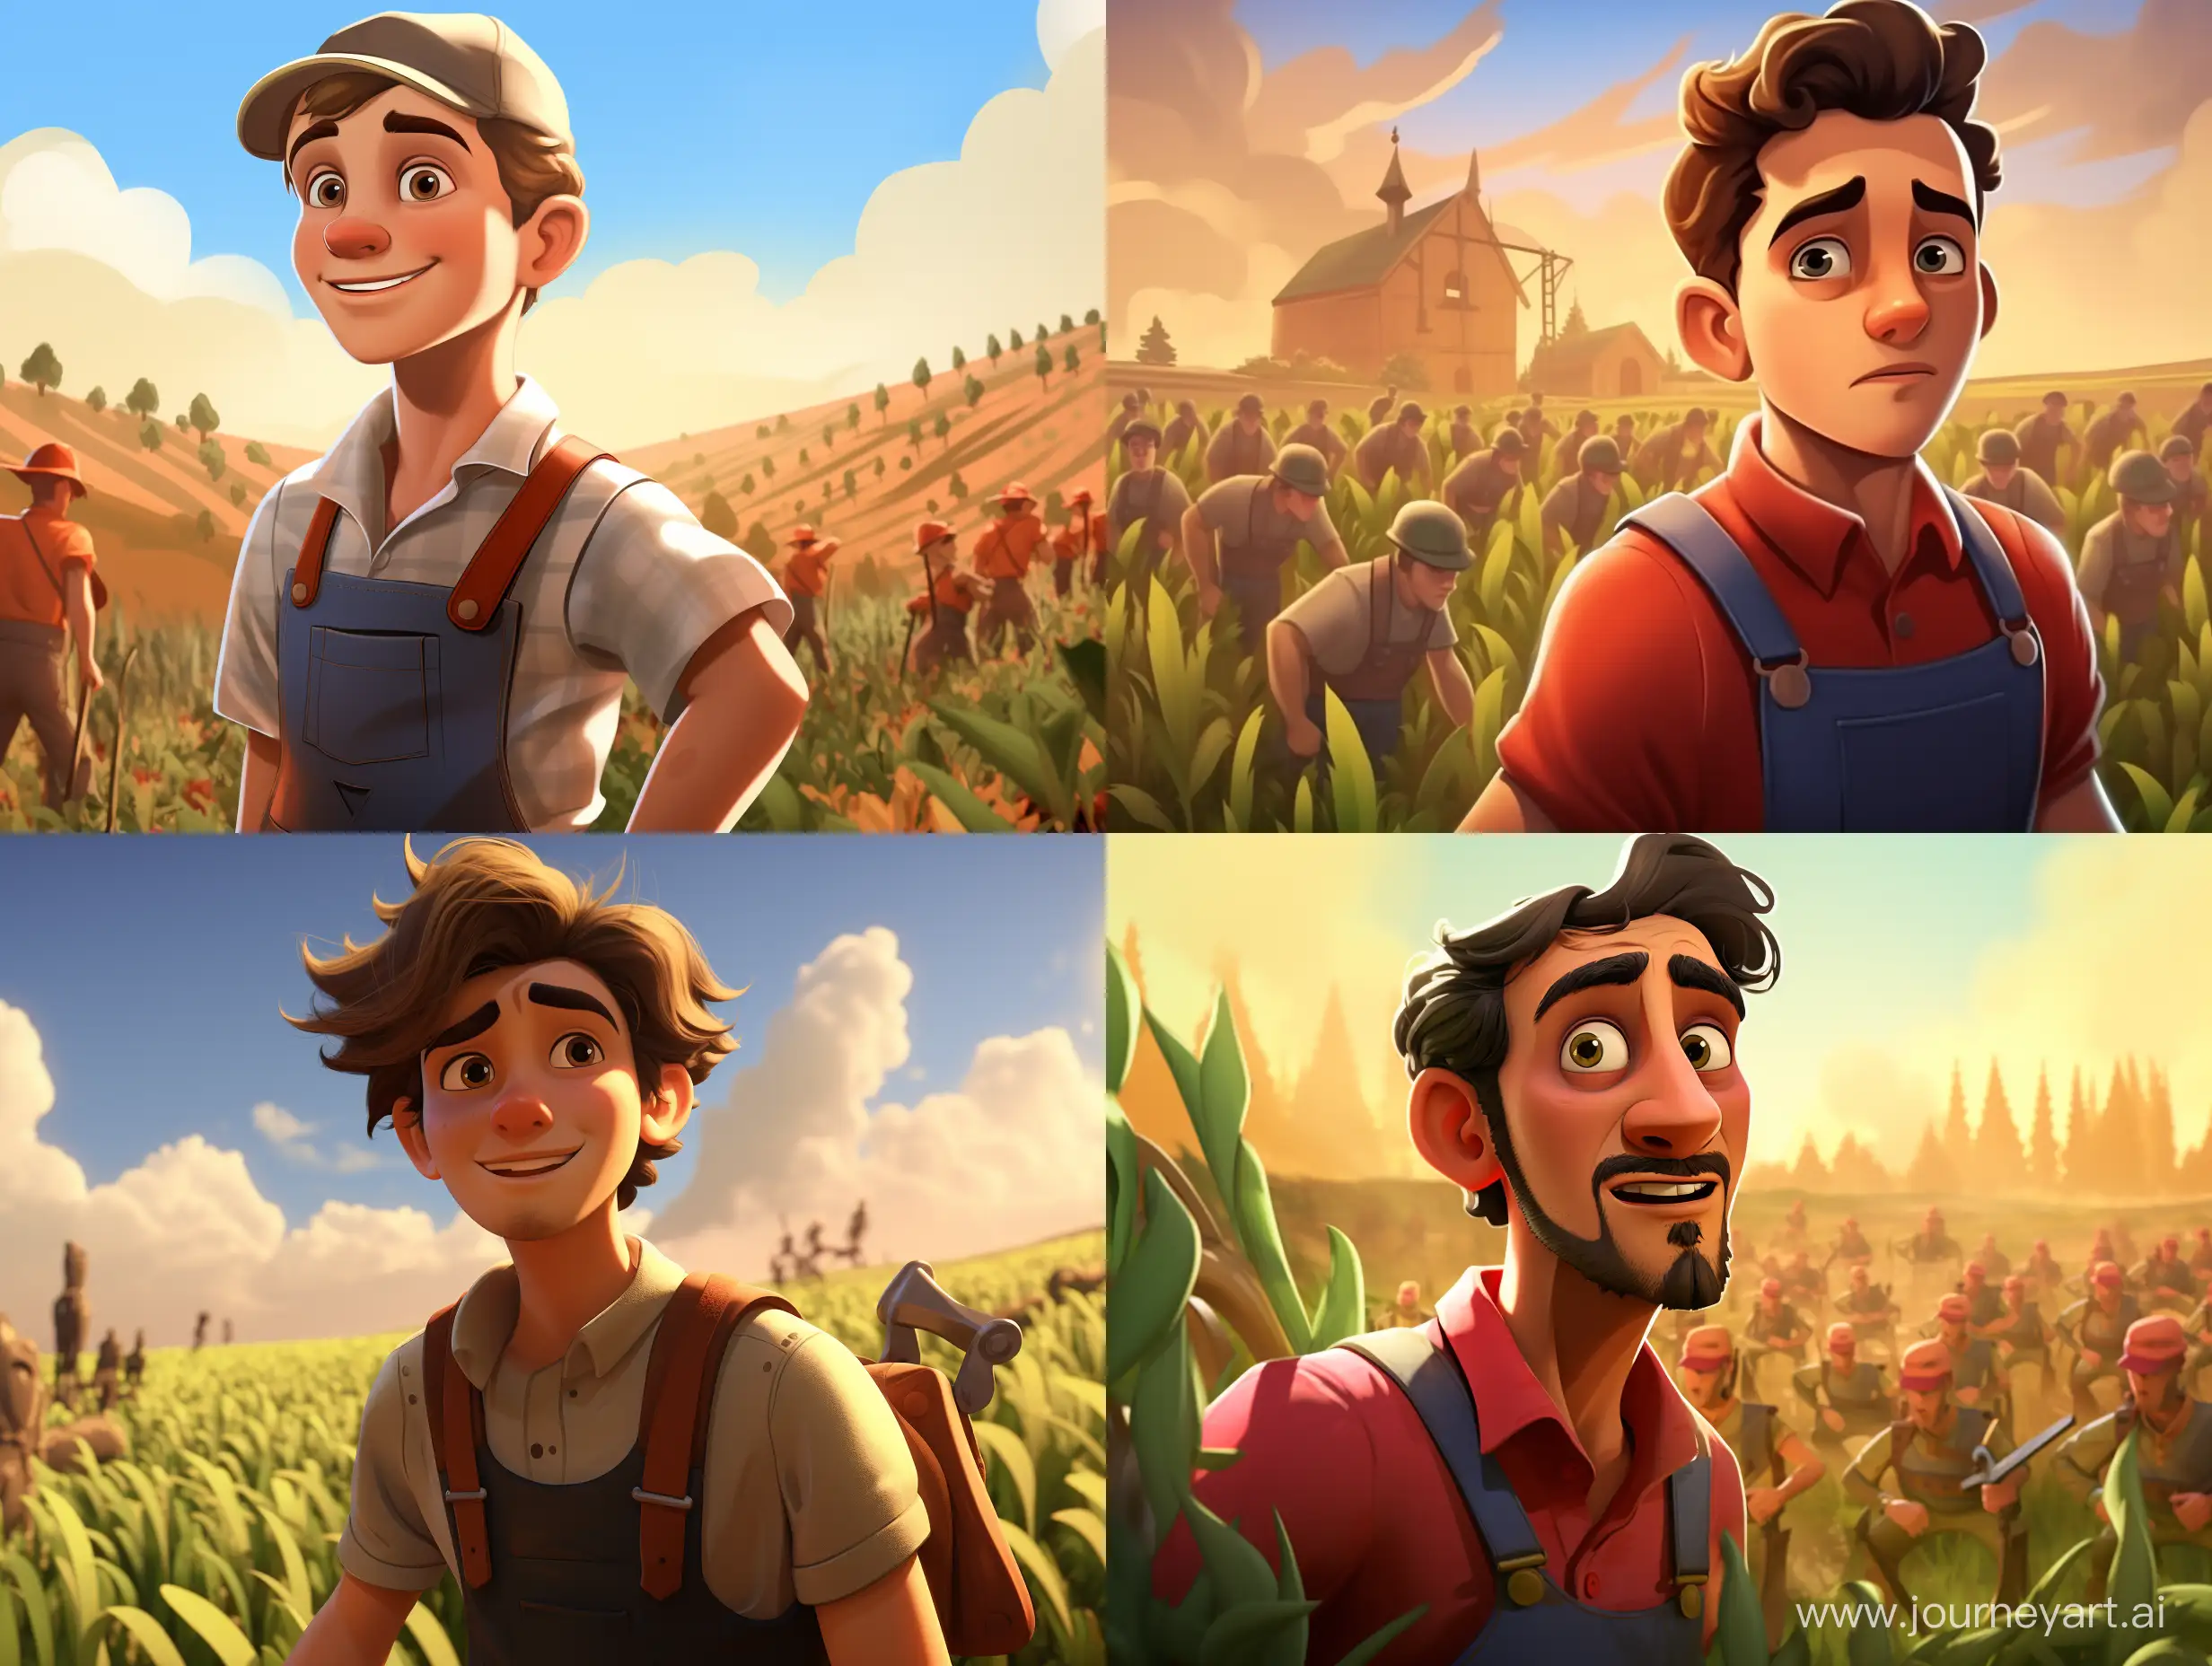 cartoon pixar style of a younge farmer in the background of a war